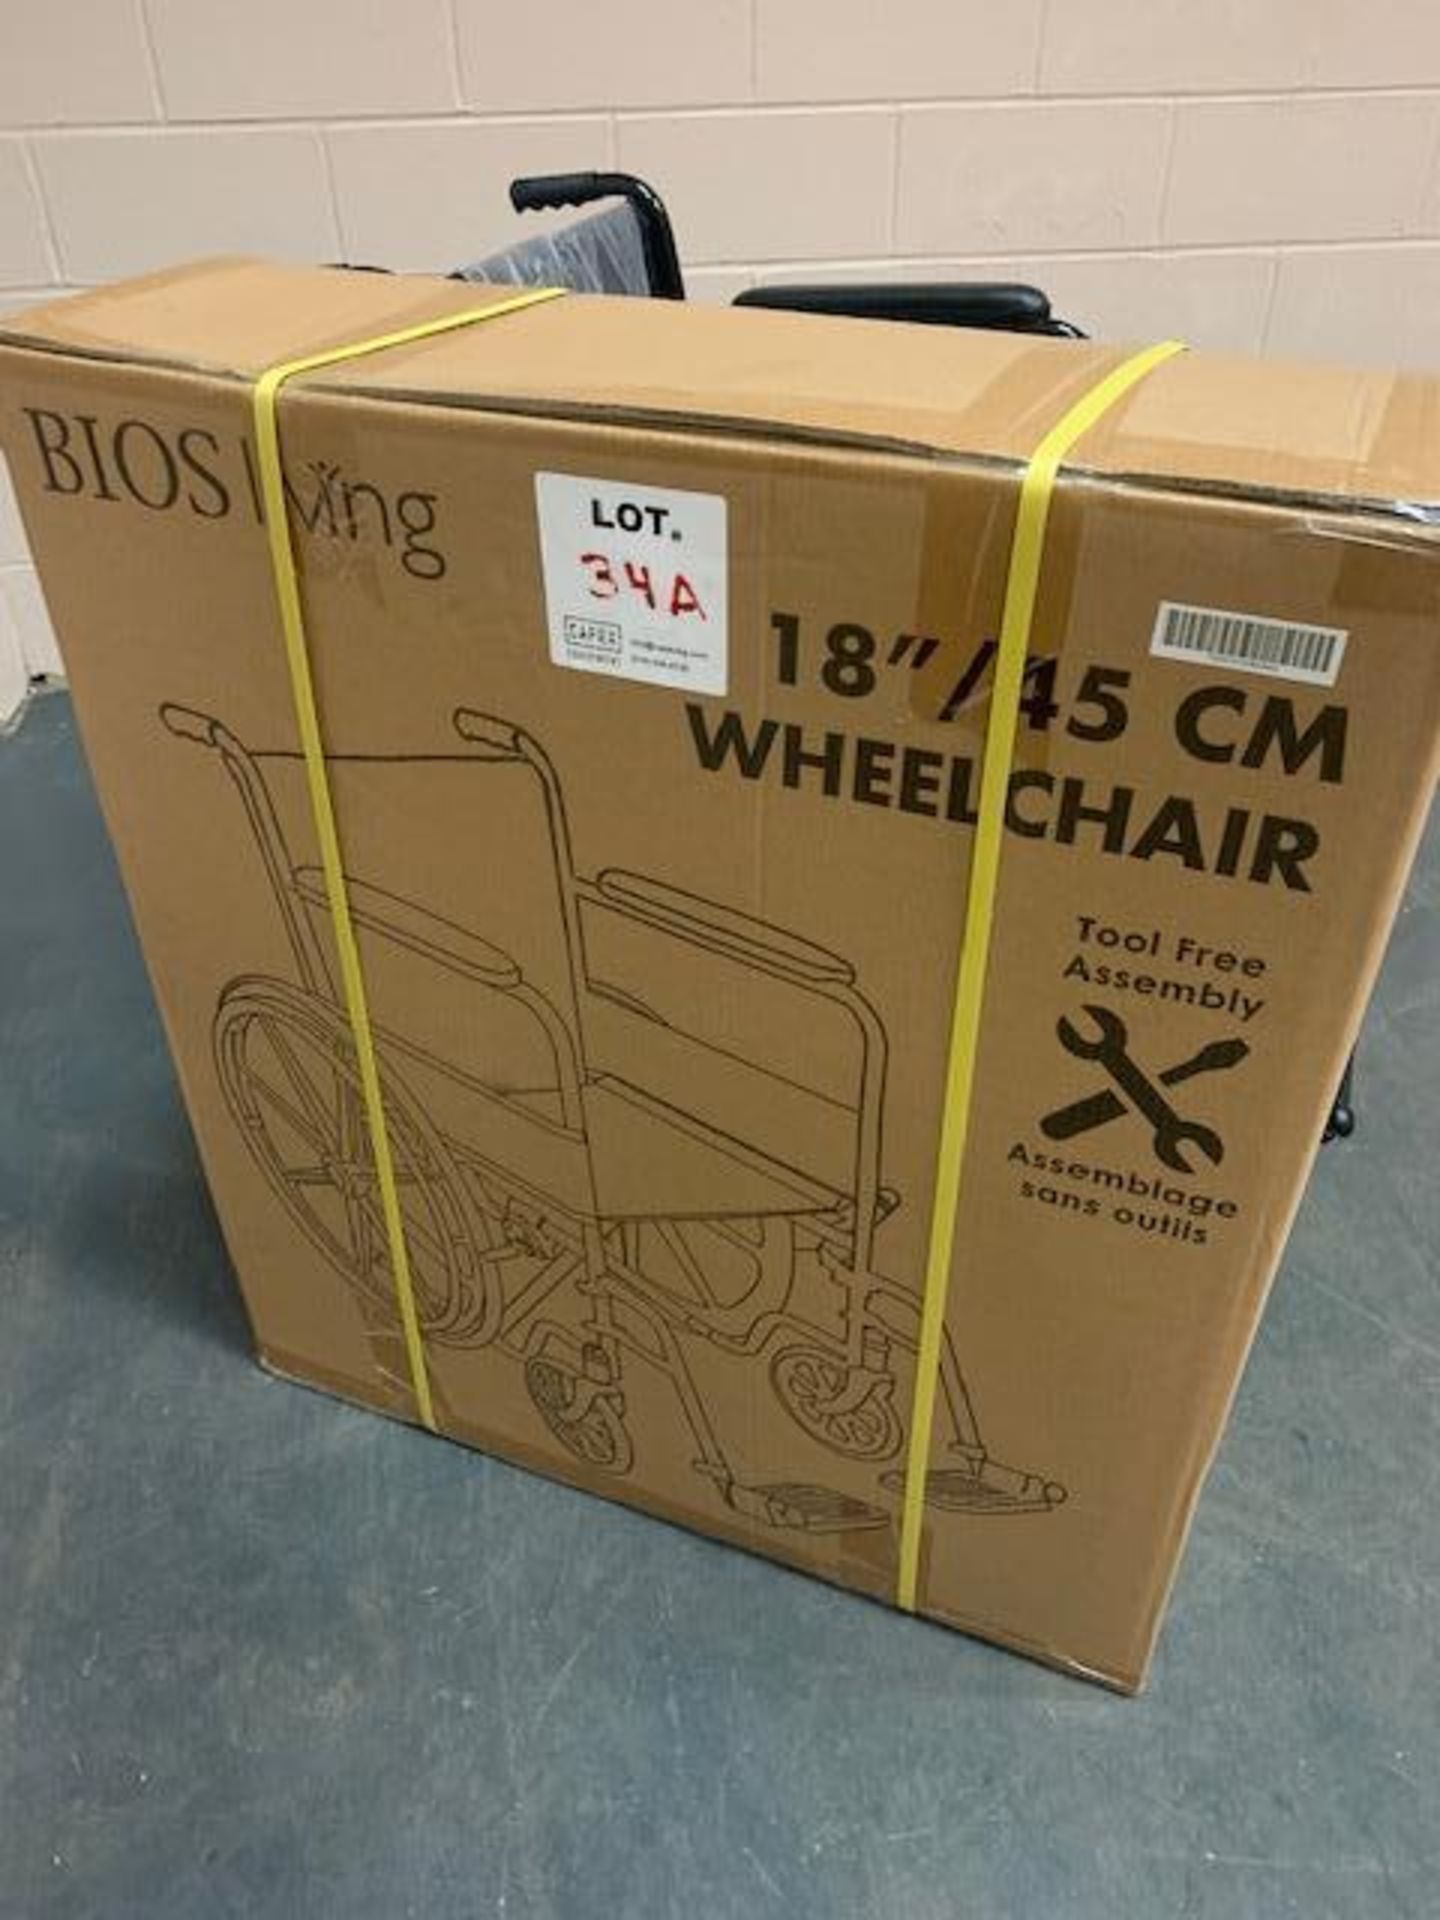 New In Box BIOS Living 18 inch / 45 cm Wheelchair Tool Free Assembly - Image 3 of 6